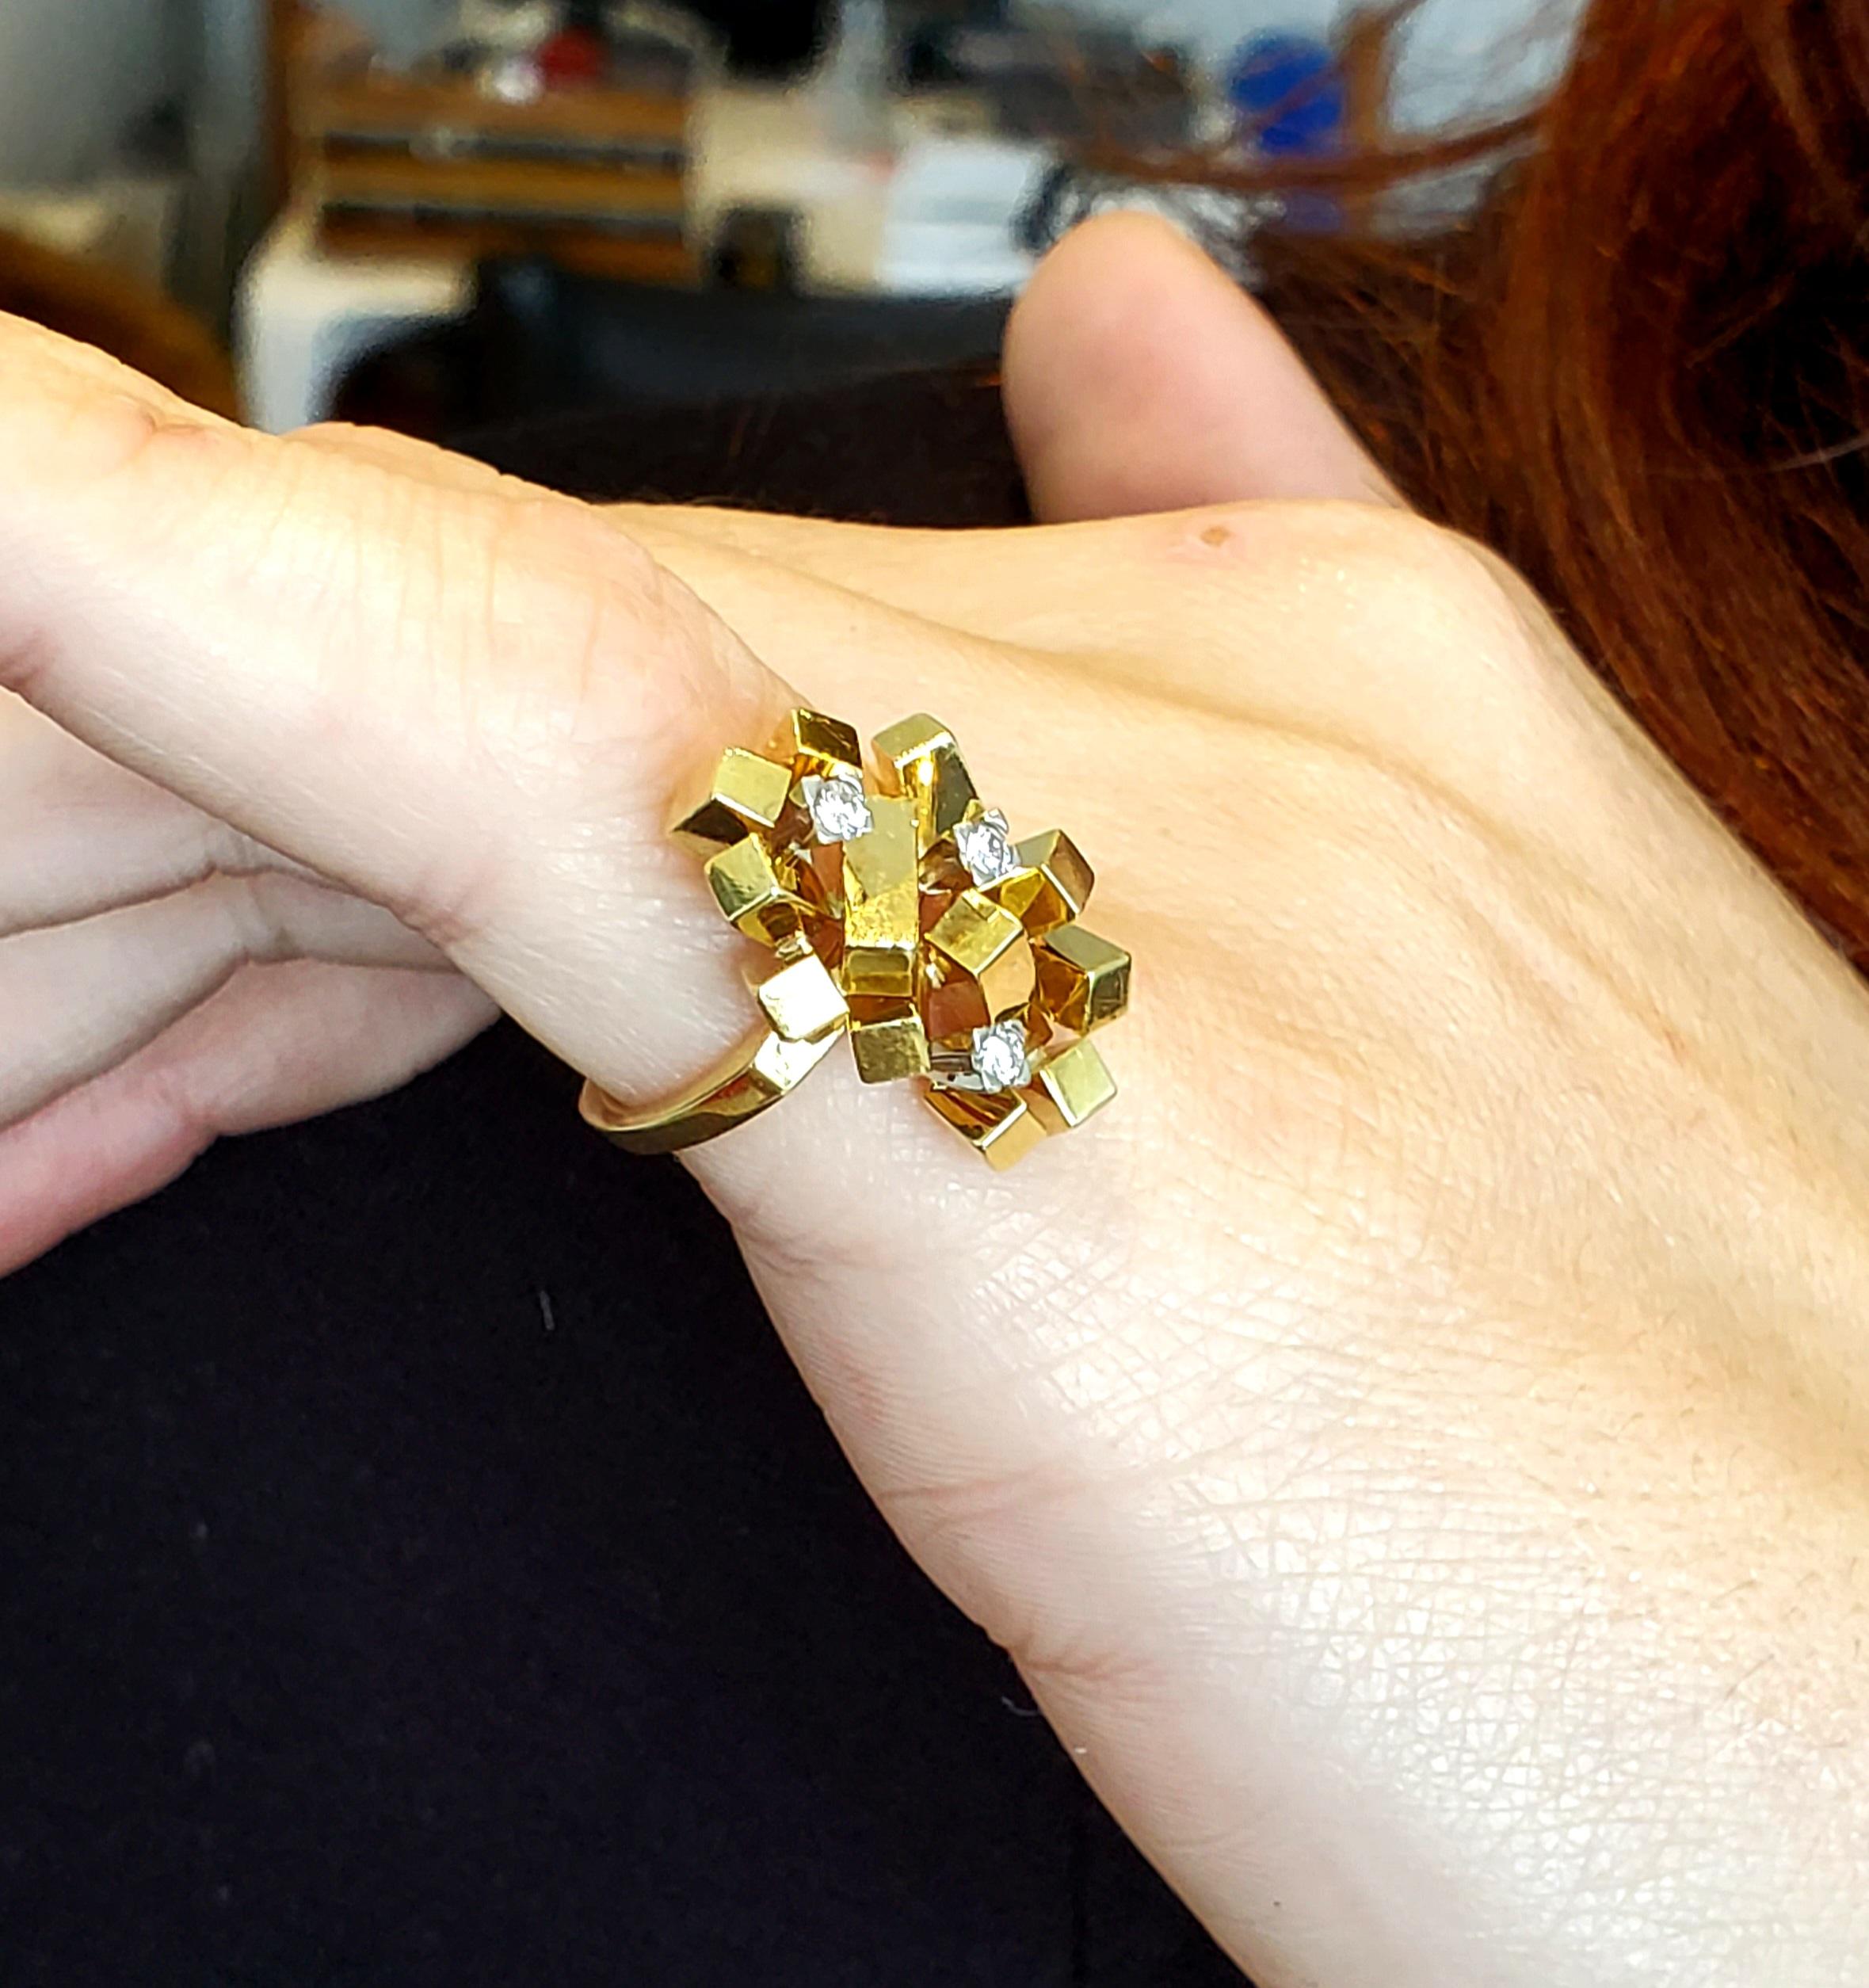 Women's or Men's Alfred Karram 1970 Brutalist Geometric Cubic Ring in 18 Kt Gold with Diamonds